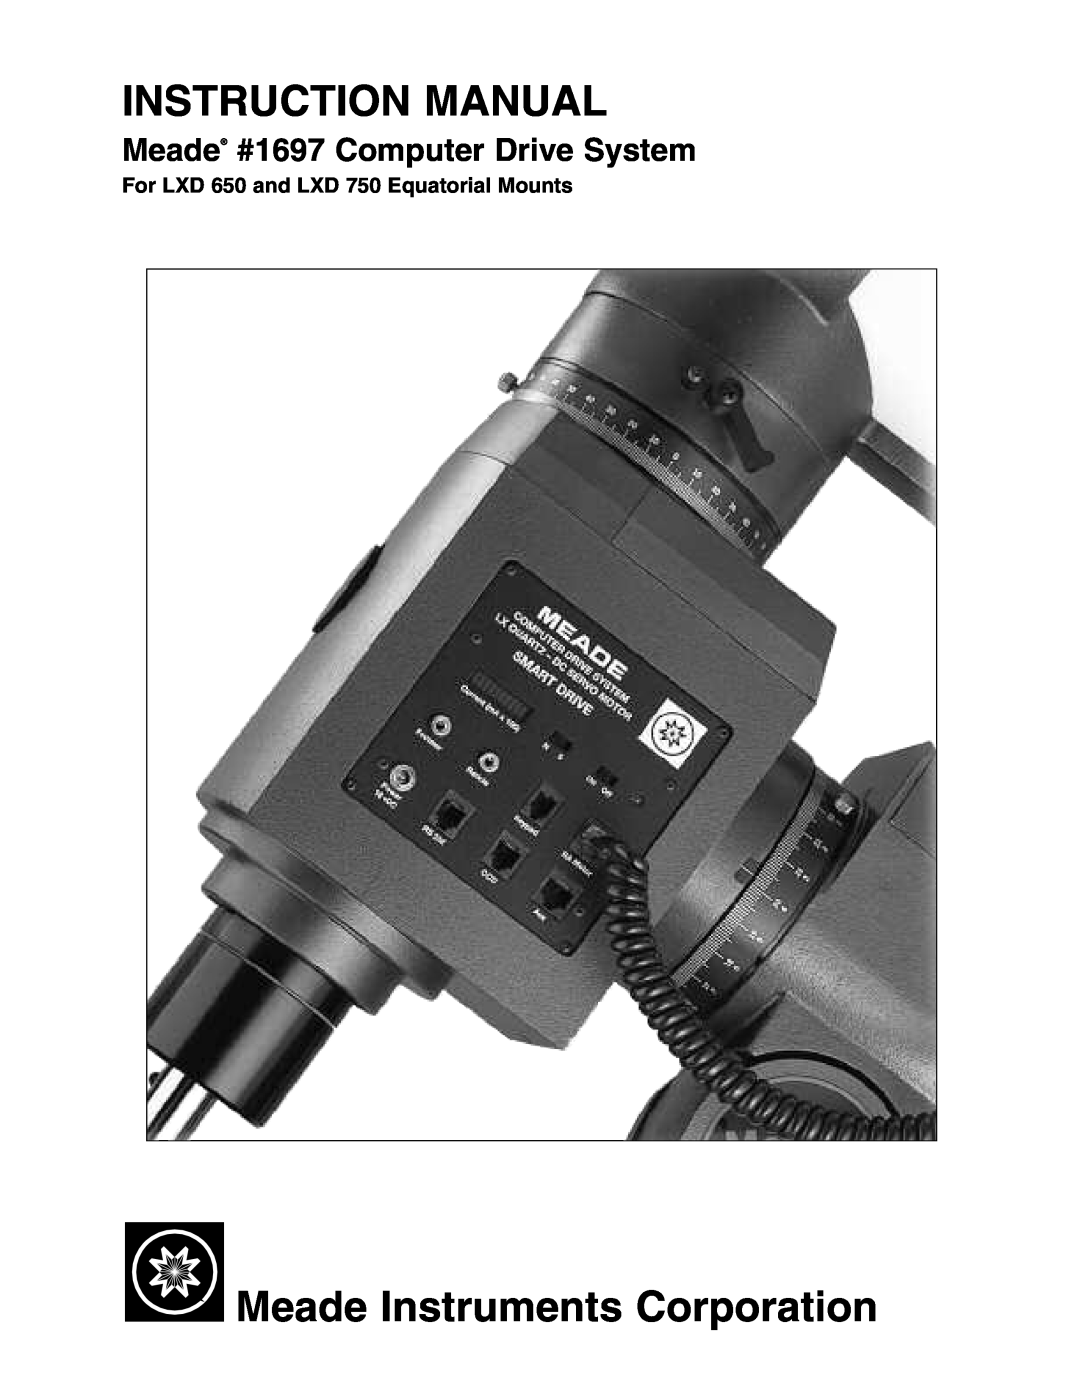 Meade instruction manual For LXD 650 and LXD 750 Equatorial Mounts, Meade Instruments Corporation 